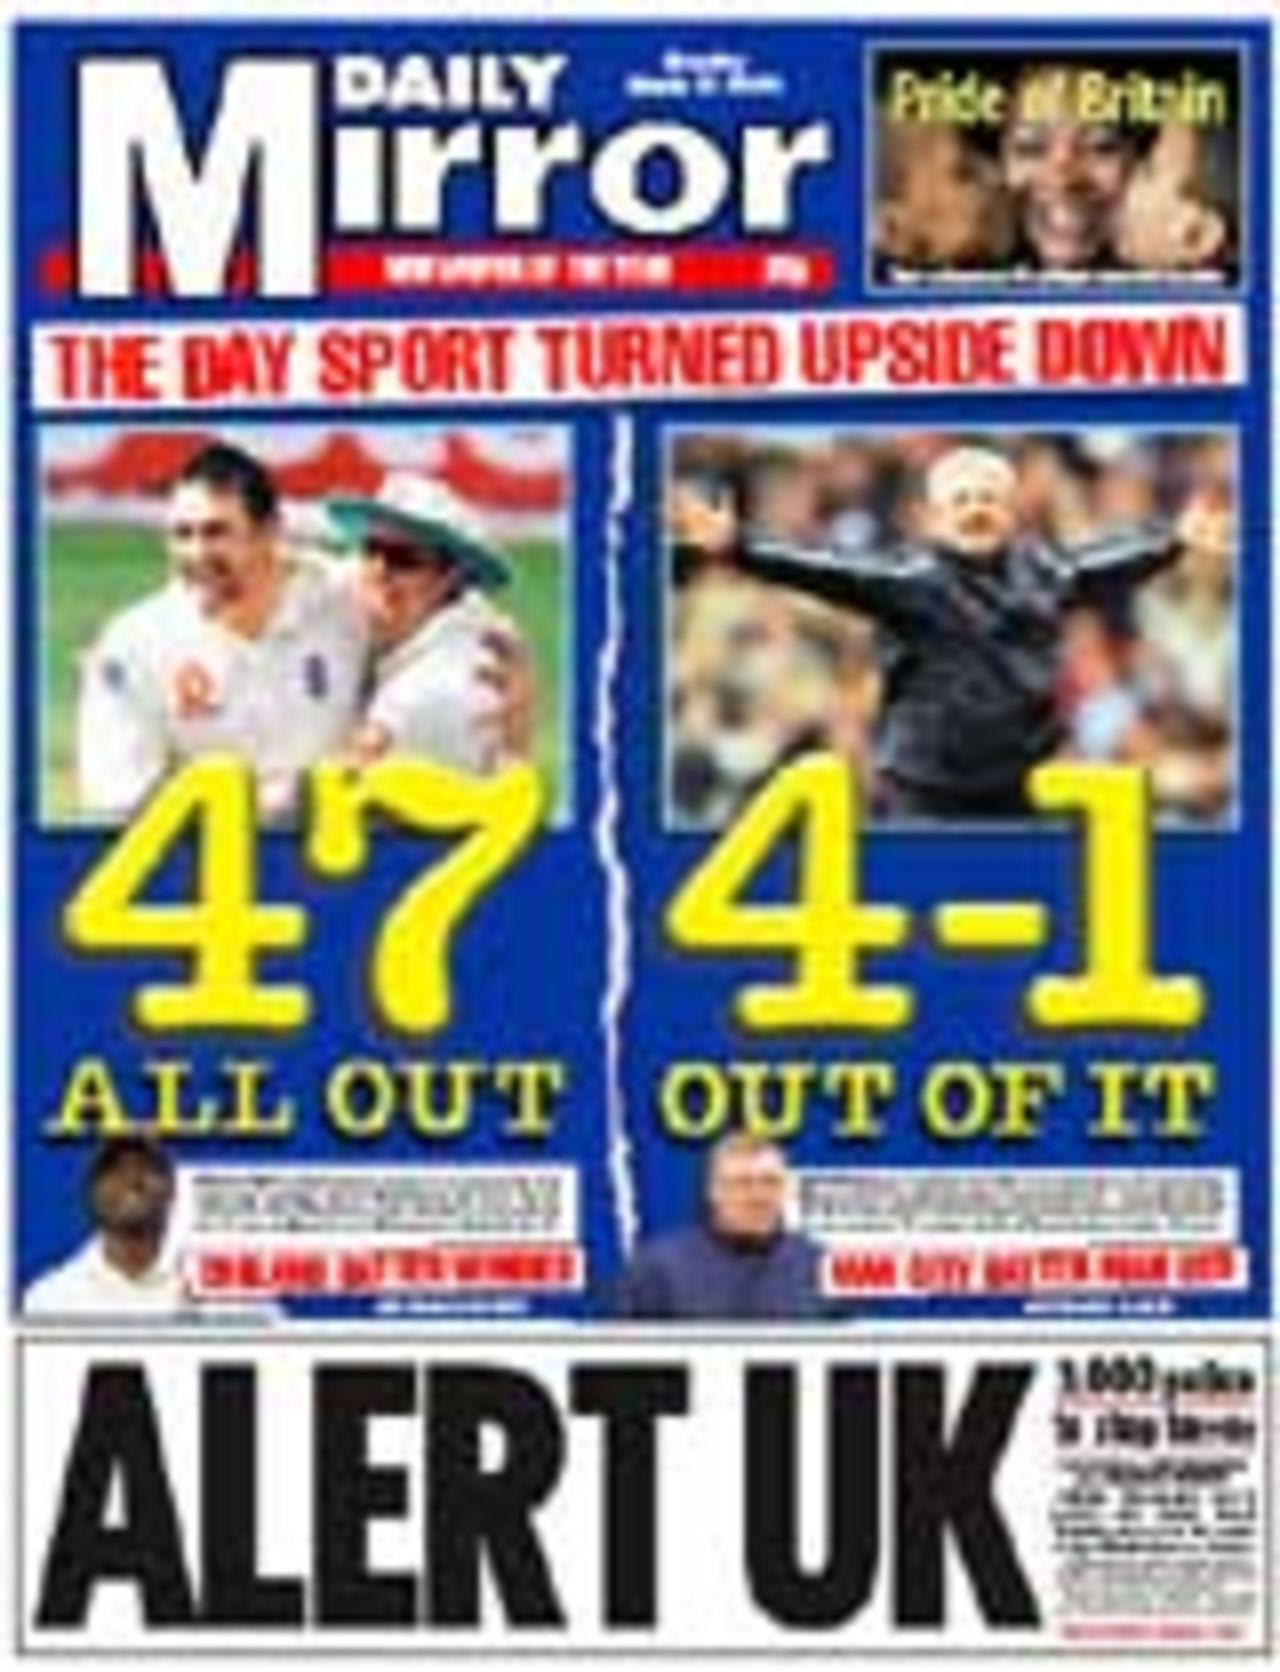 The Mirror front page, March 15, 2004